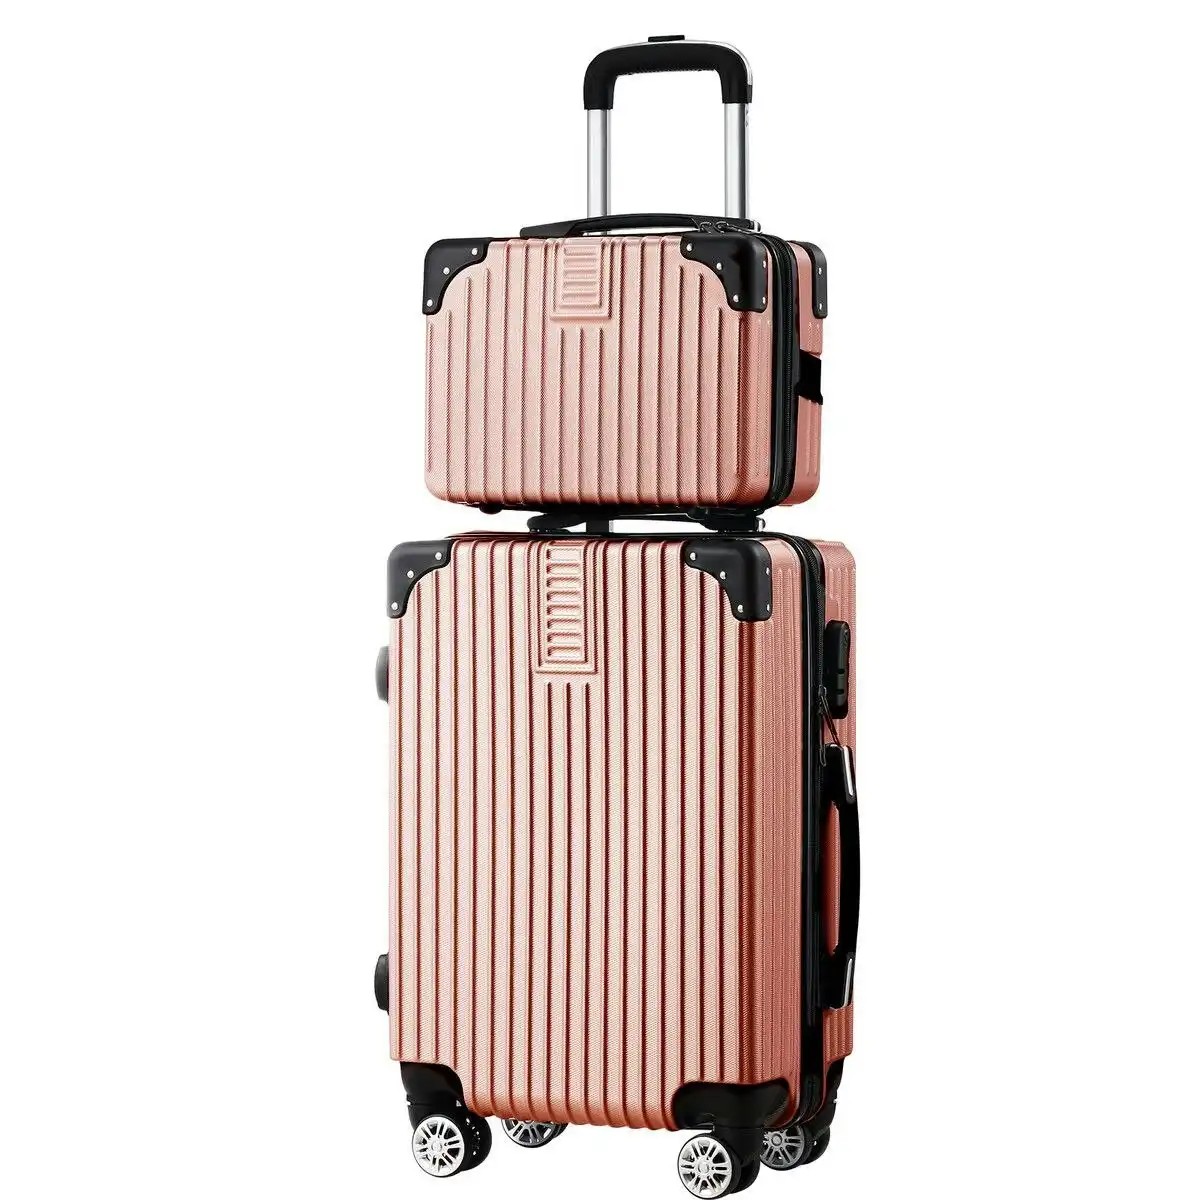 Buon Viaggio 2 Piece Luggage Set Carry On Hard Shell Travel Suitcases Traveller Checked Lightweight Rolling Trolley Vanity Bag